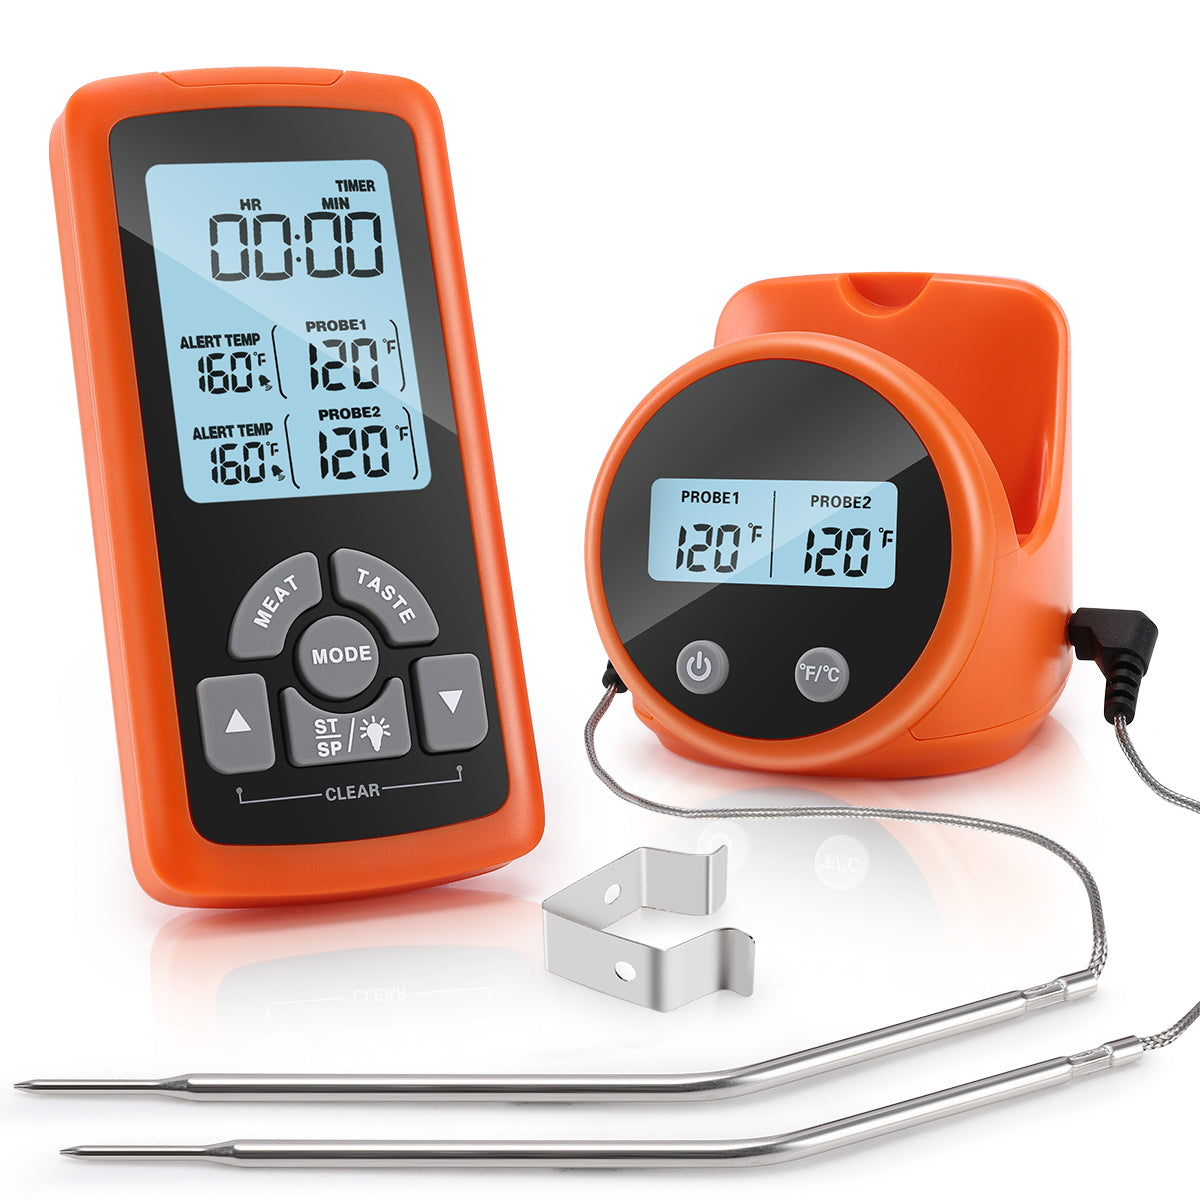 The Best Meat Thermometer (2021) for the Smoker, the Grill, and